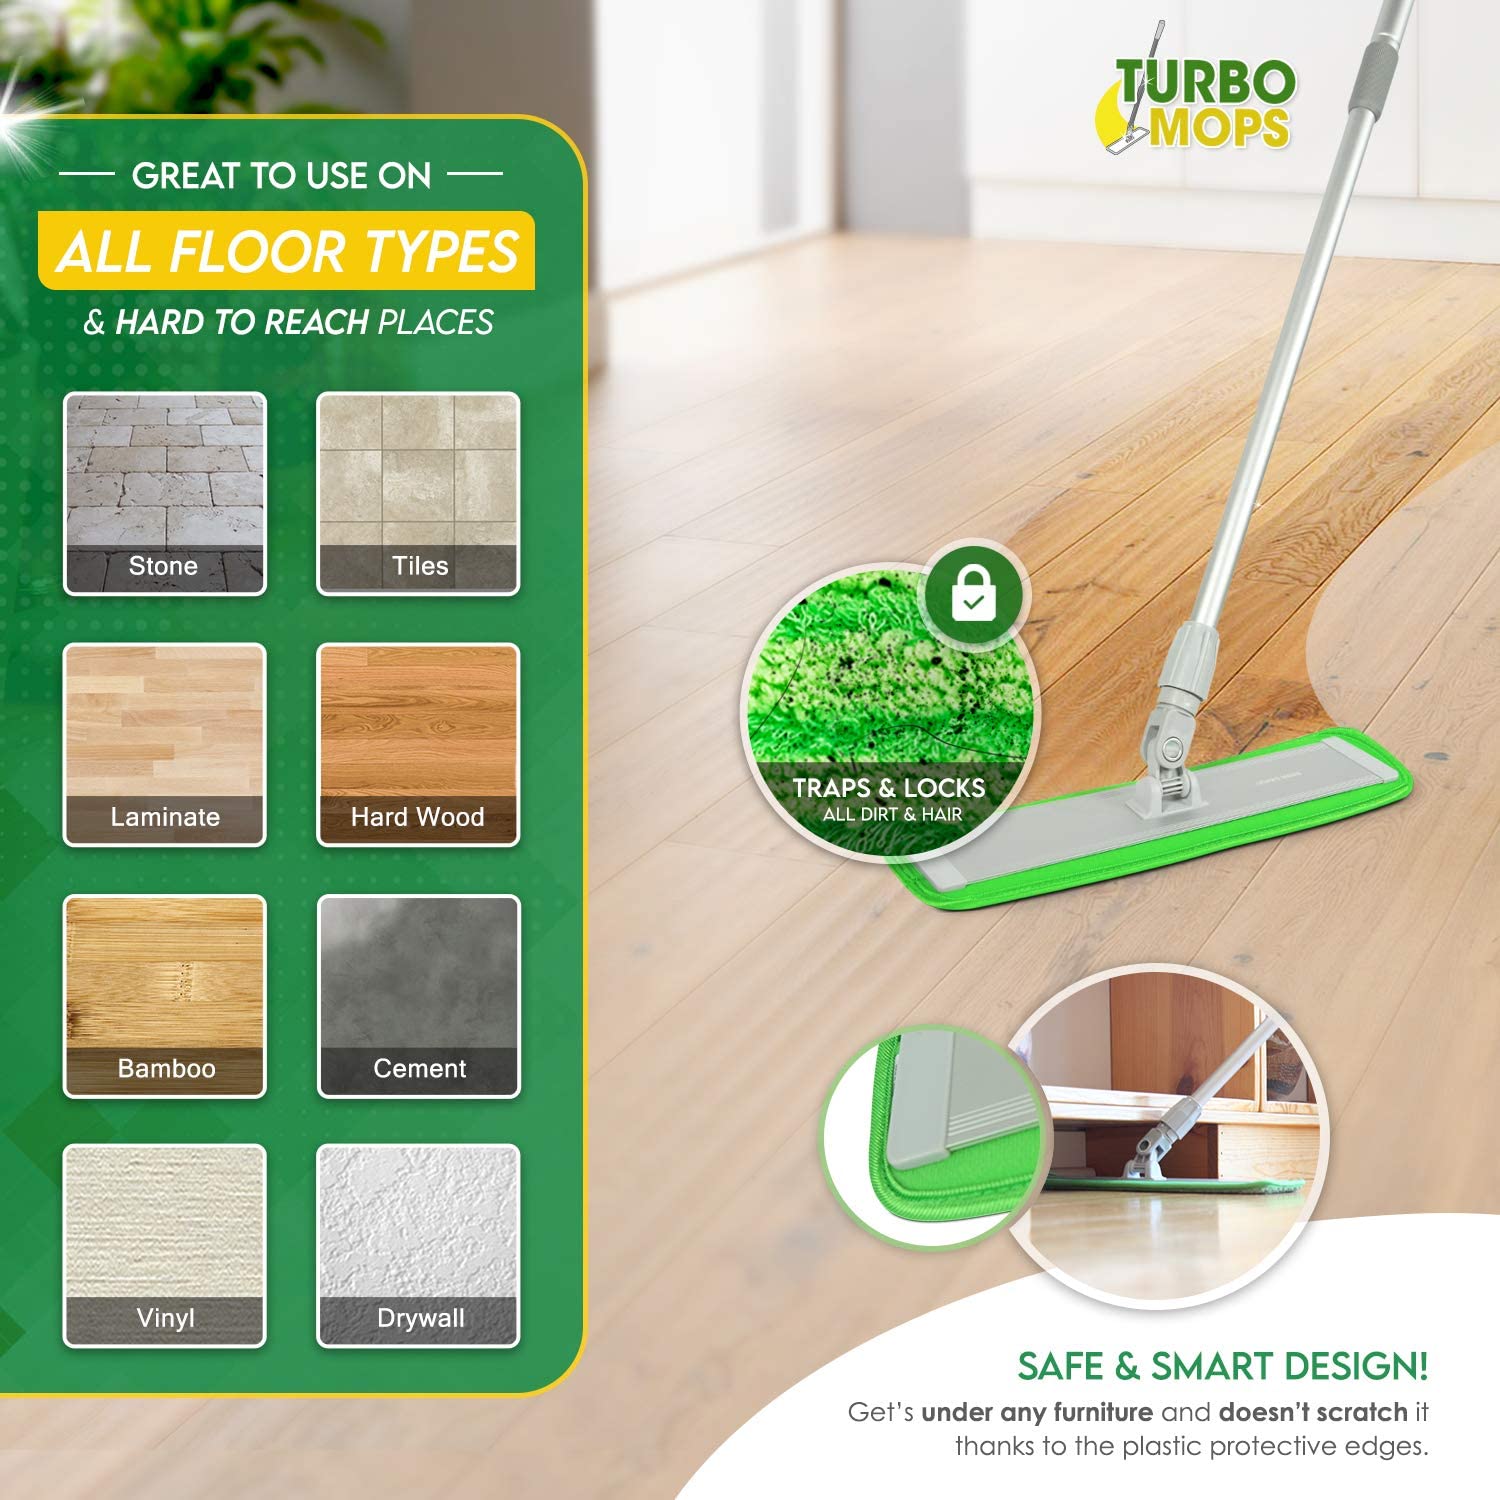 Microfiber Mop Floor Cleaning System - Washable Pads Perfect Cleaner for Hardwood, Laminate & Tile - 360 Dry Wet Reusable Dust Mops with Soft Refill Pads & Handle for Wood, Walls, Vinyl, Kitchen - image 3 of 7